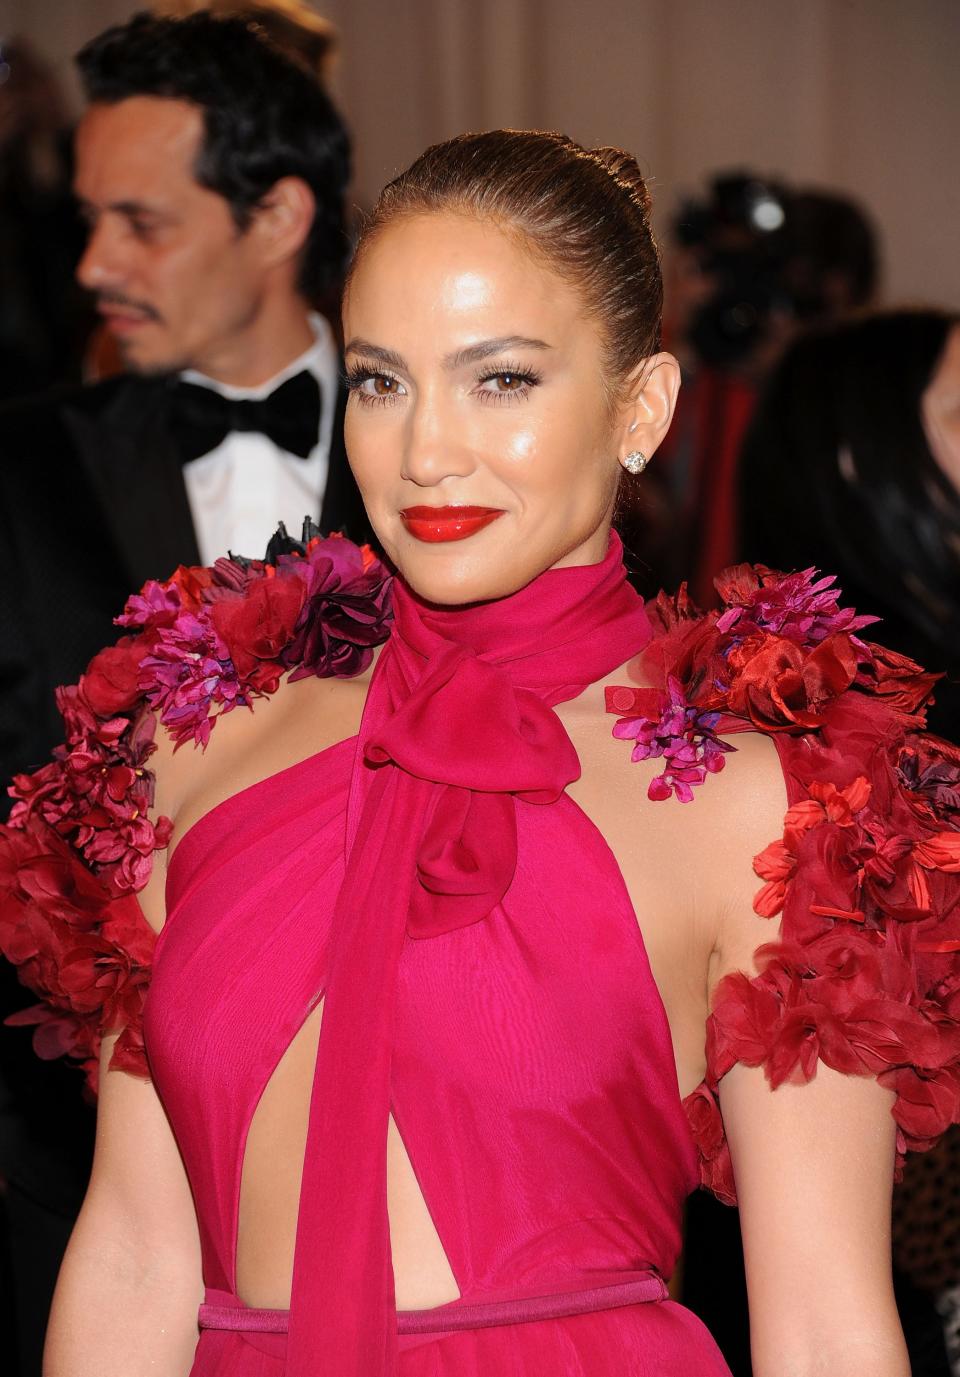 Jennifer Lopez wearing a plunging gown with a bow at the neck and floral embellishments on the shoulders